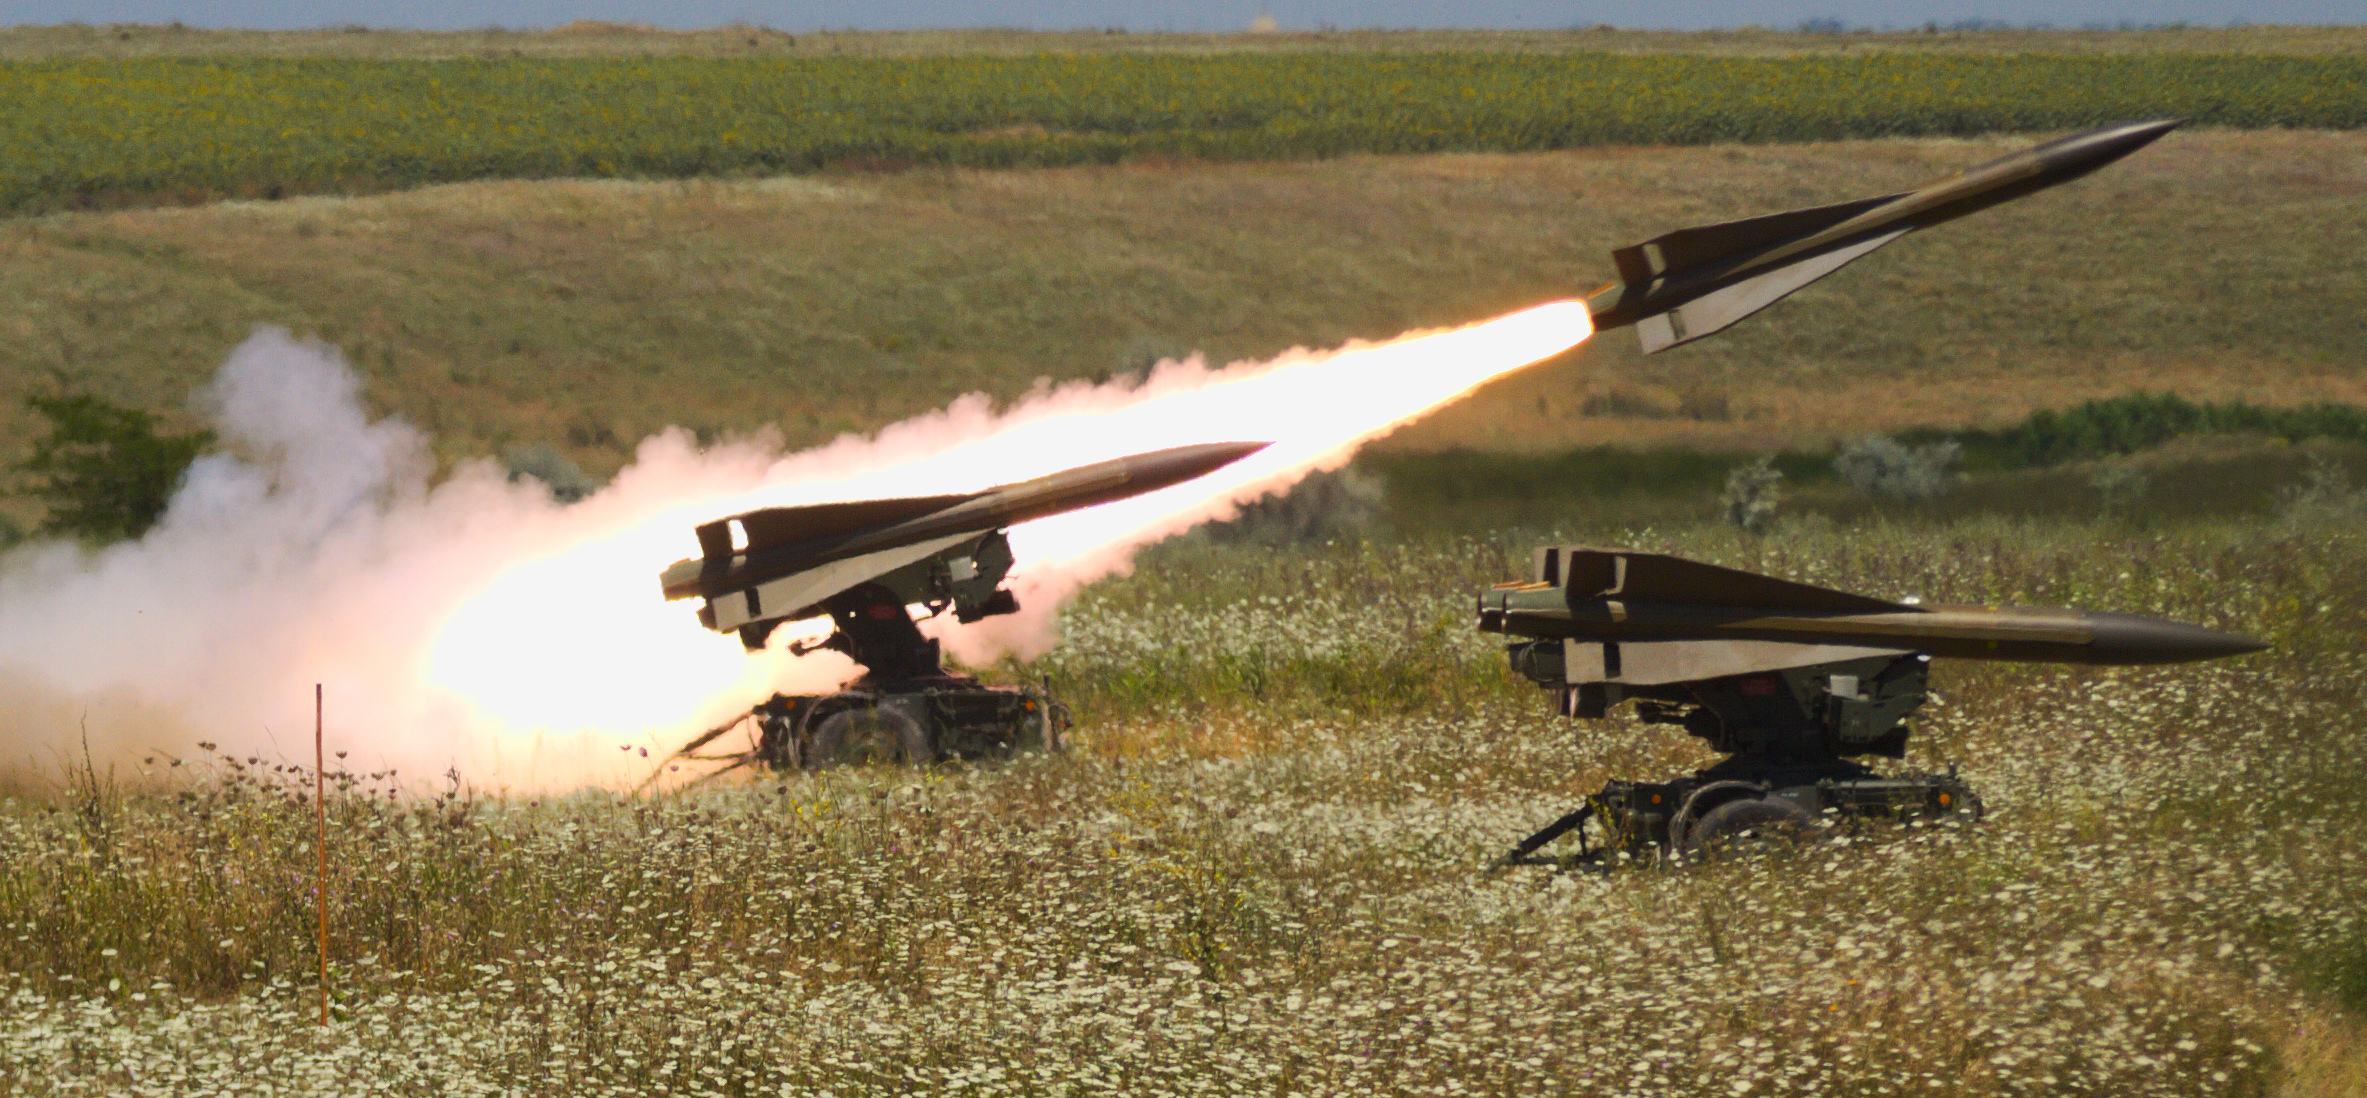 Romanian MIM 23 Hawk missile is fired from Capu Midia Training Area